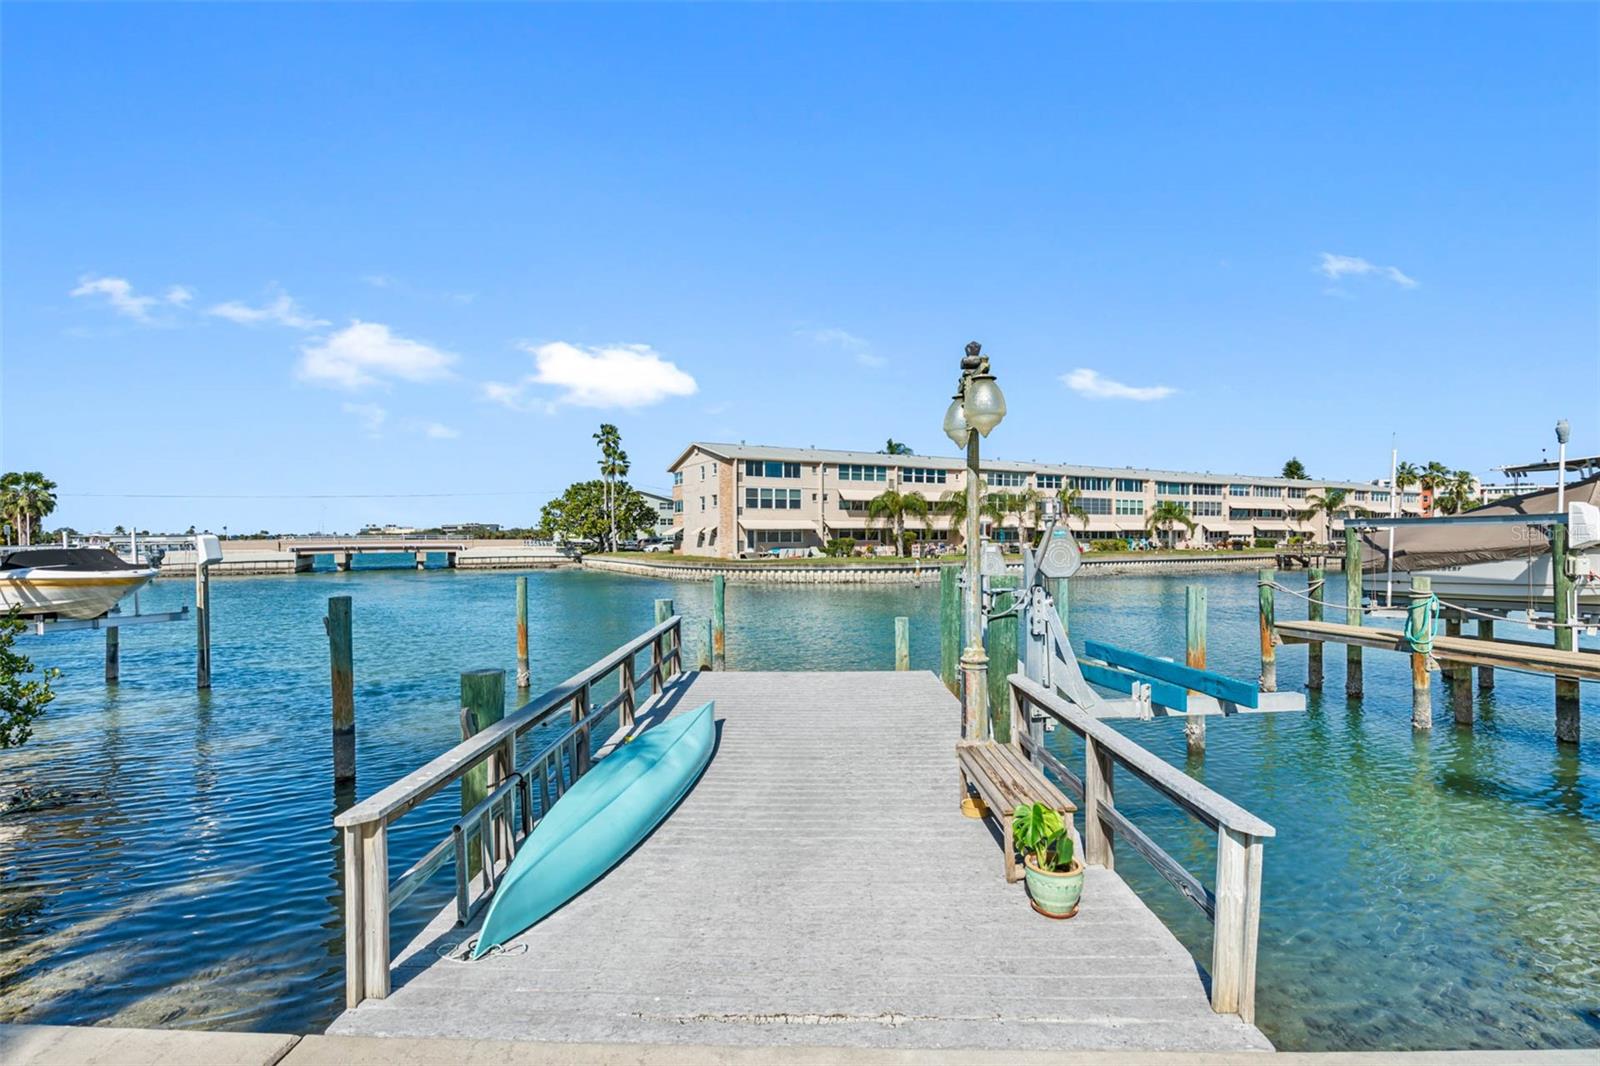 Embrace waterfront living: Your private gateway to the Gulf of Mexico awaits.